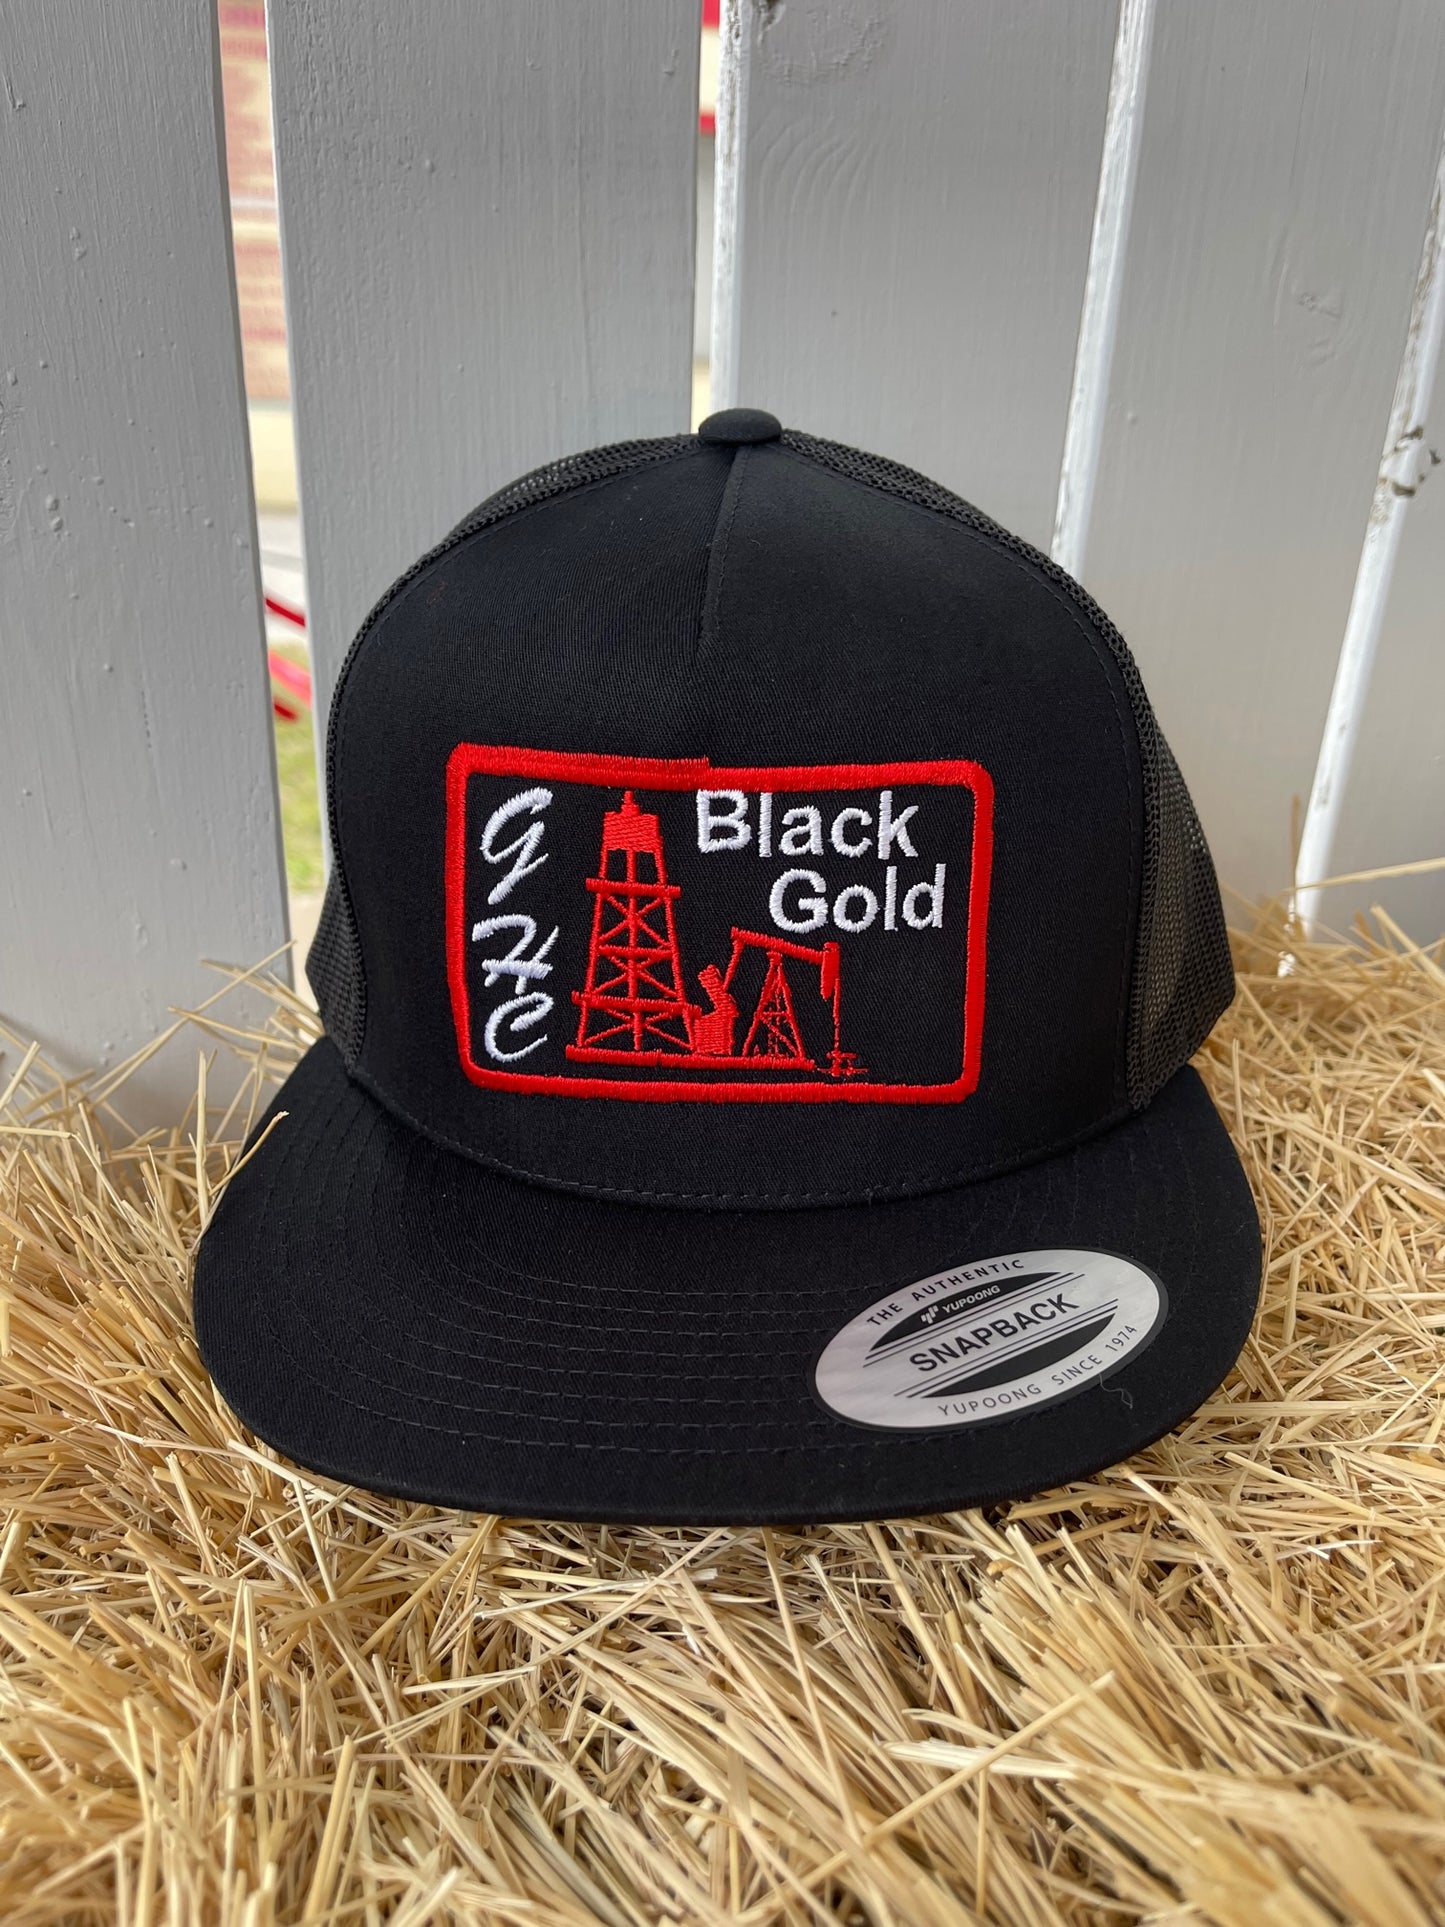 Gritty Hat Co Black Gold Cap